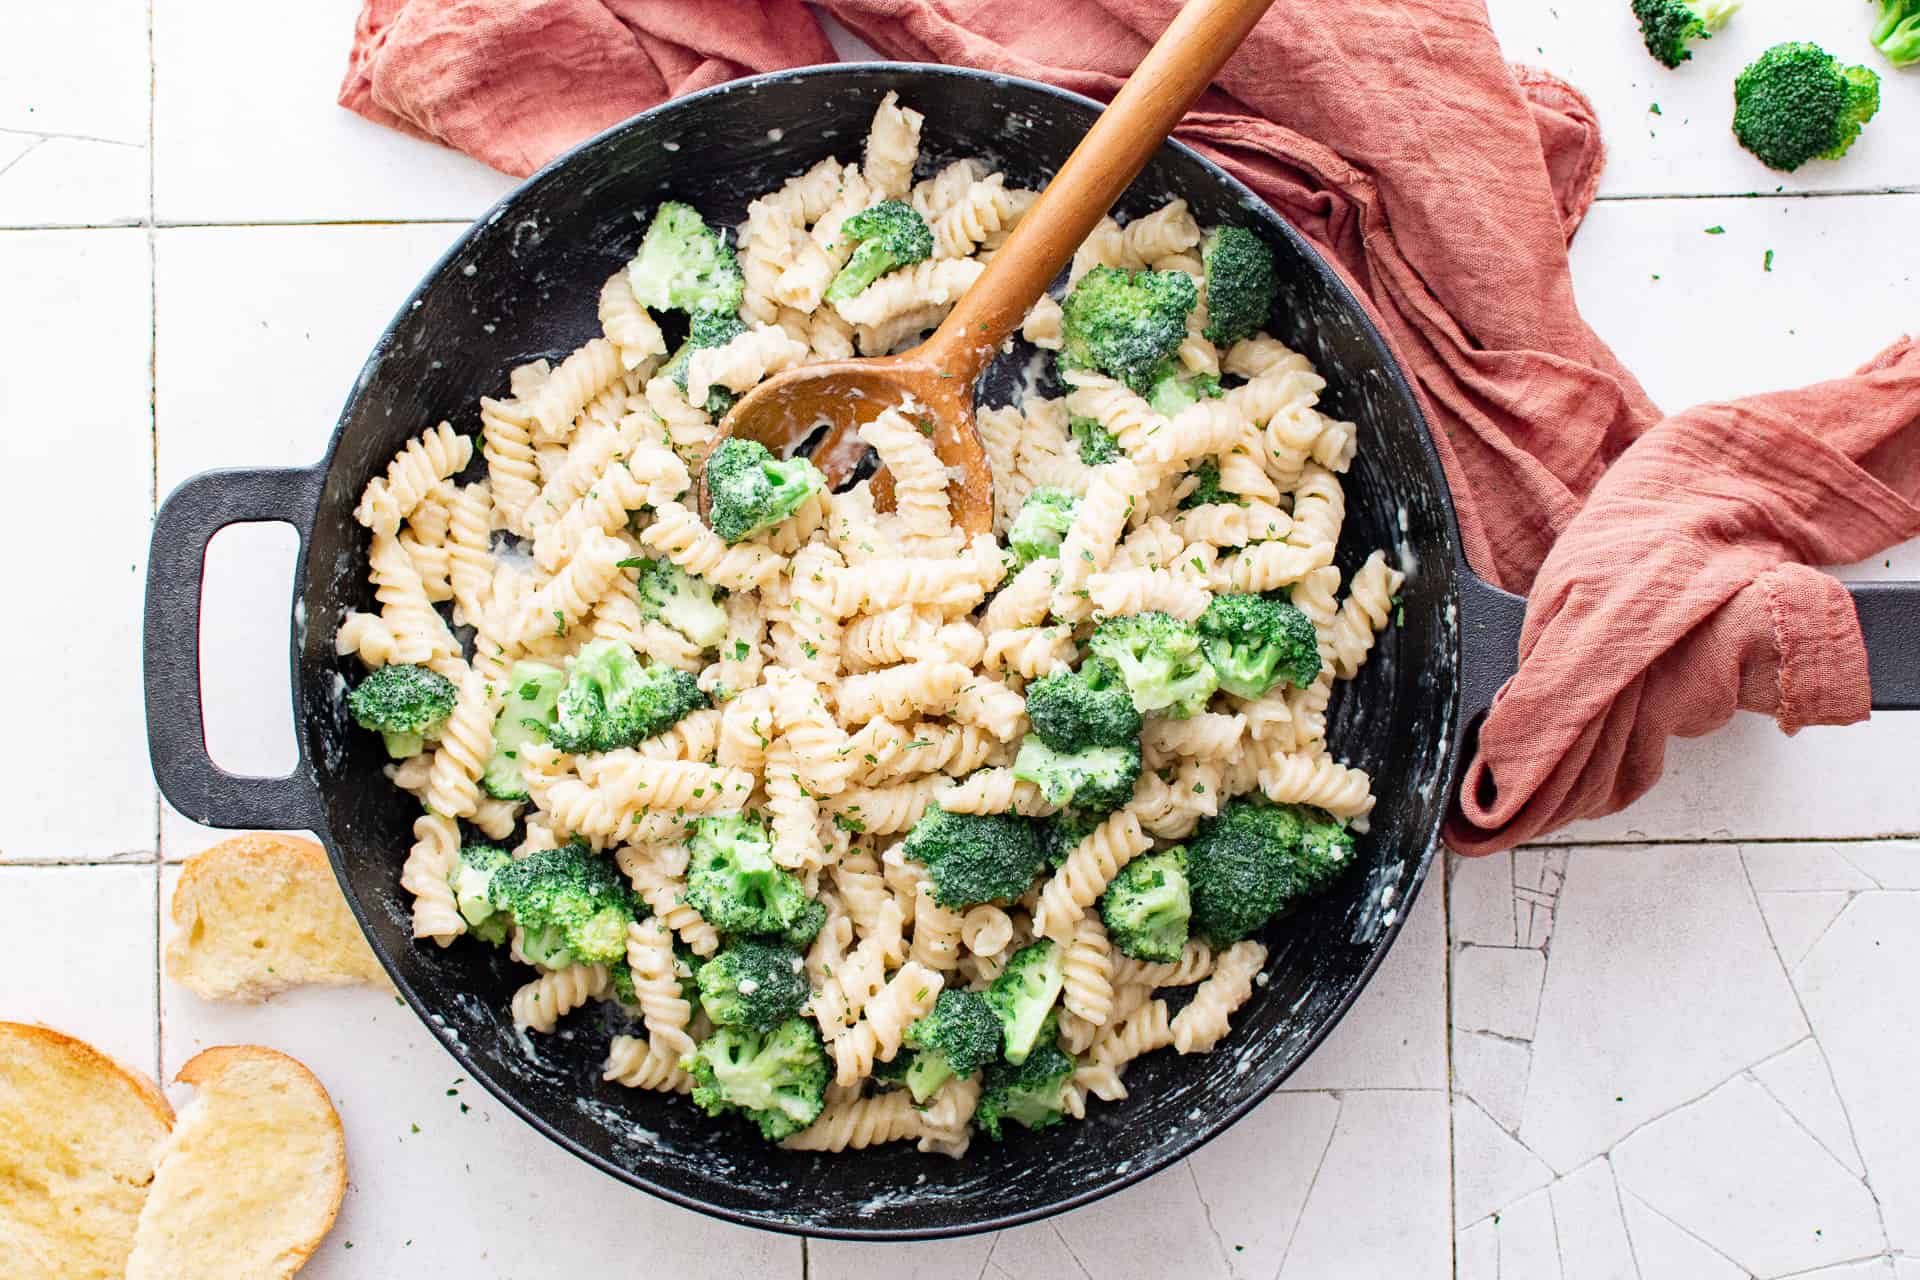 Cast iron pan with broccoli pasta and a serving spoon.